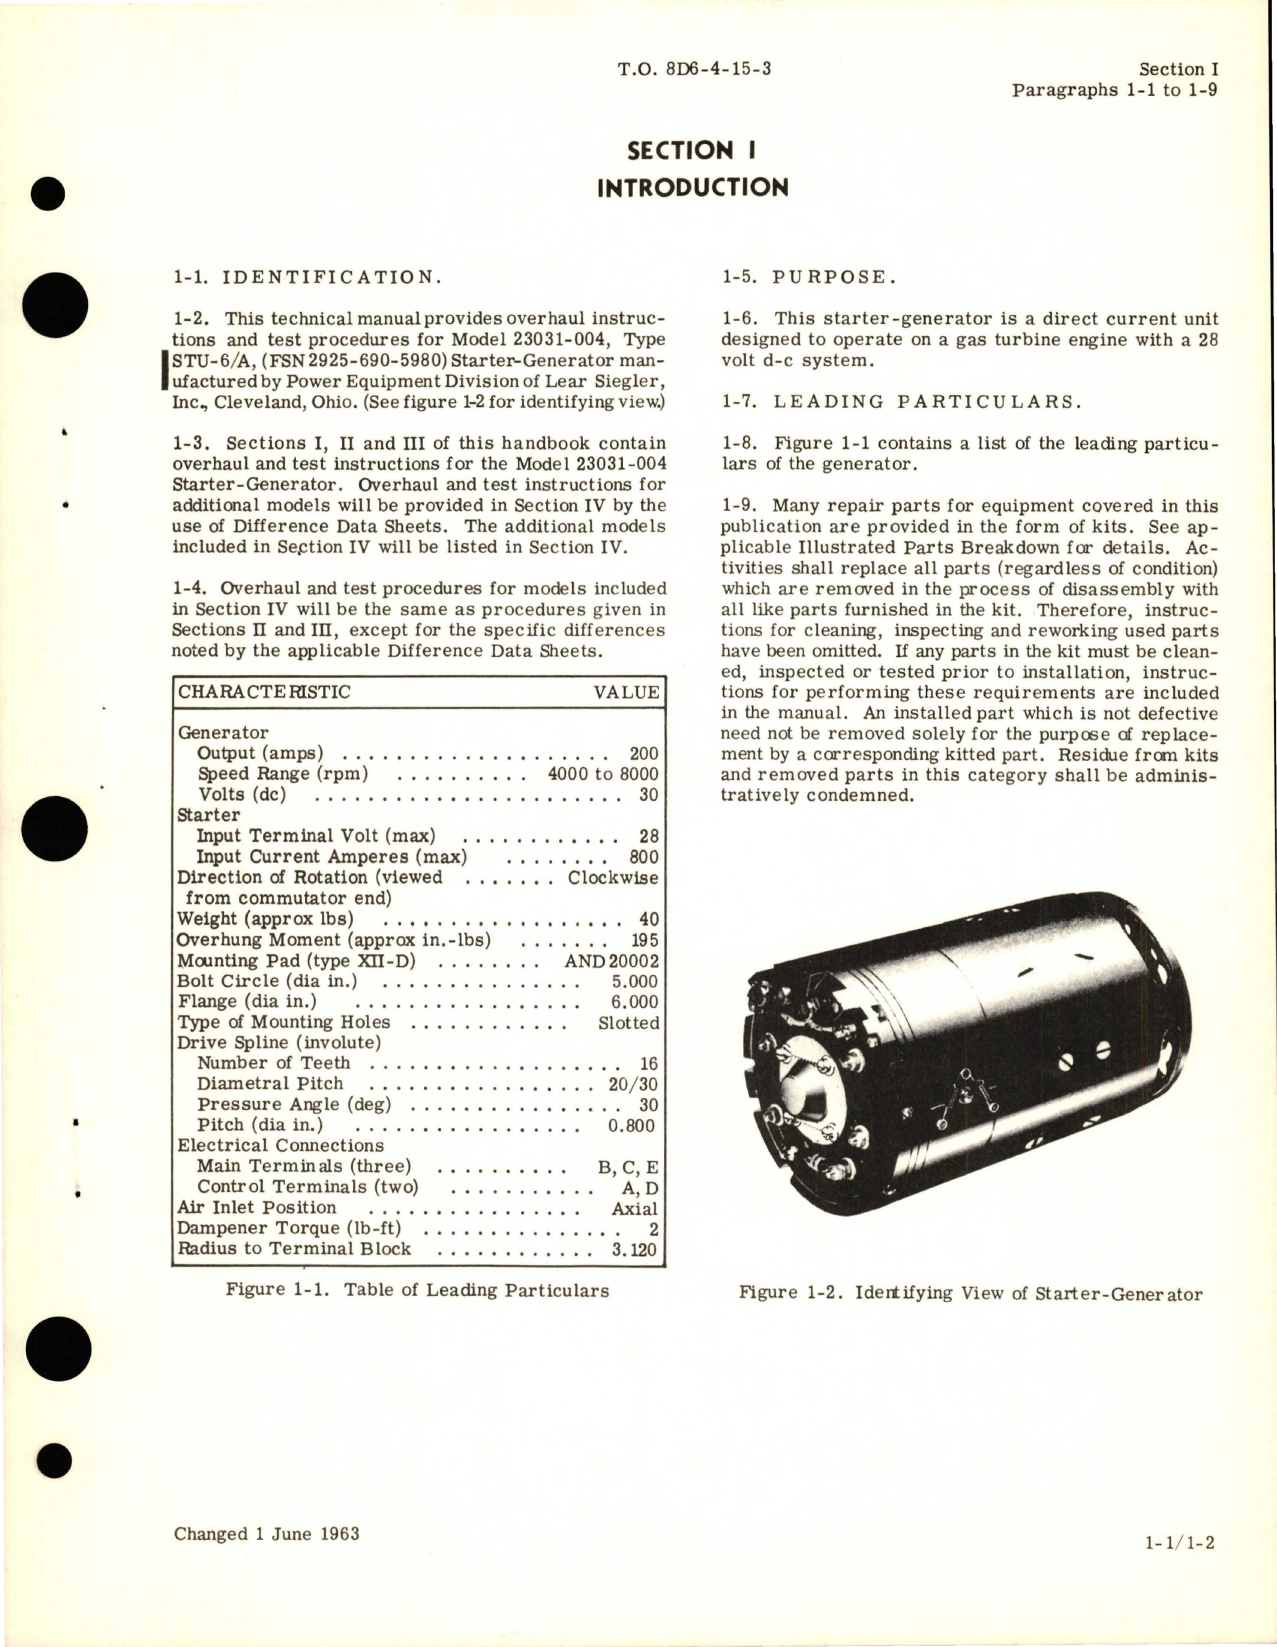 Sample page 5 from AirCorps Library document: Overhaul Instructions for Starter-Generator - Type STU-6 A - Model 23031-004